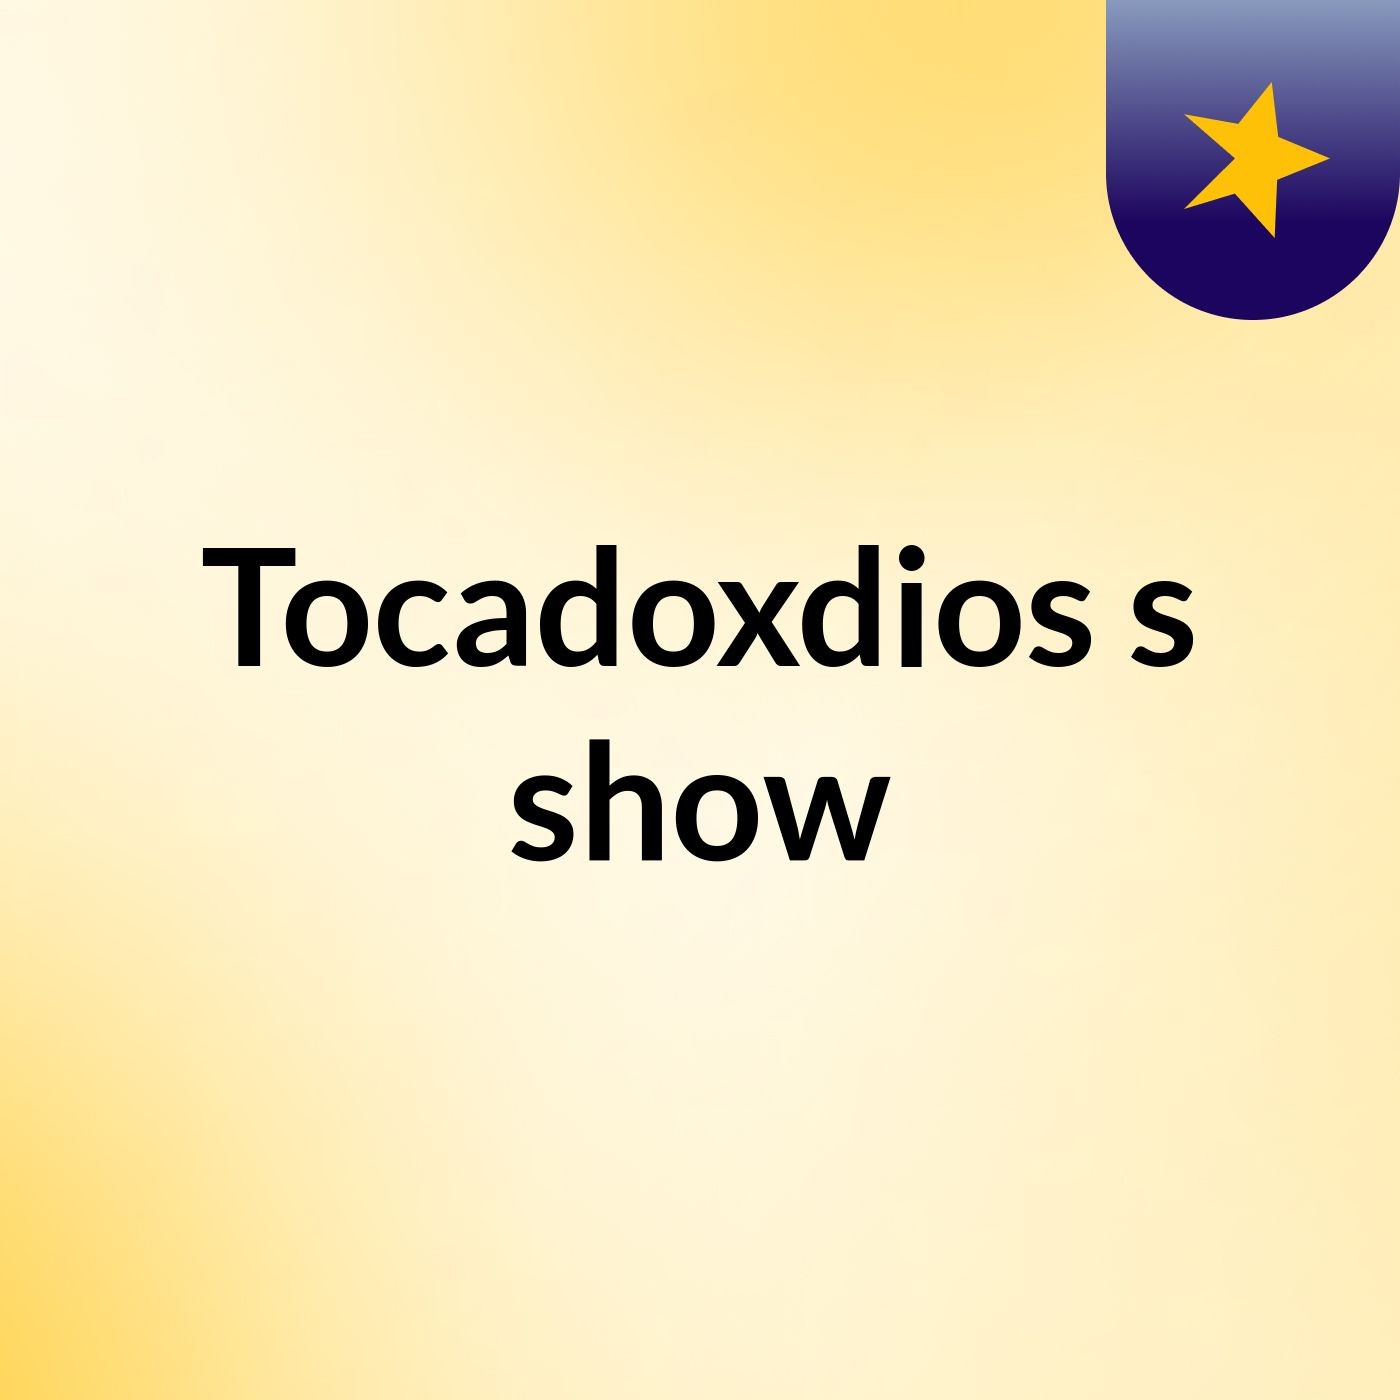 Tocadoxdios's show